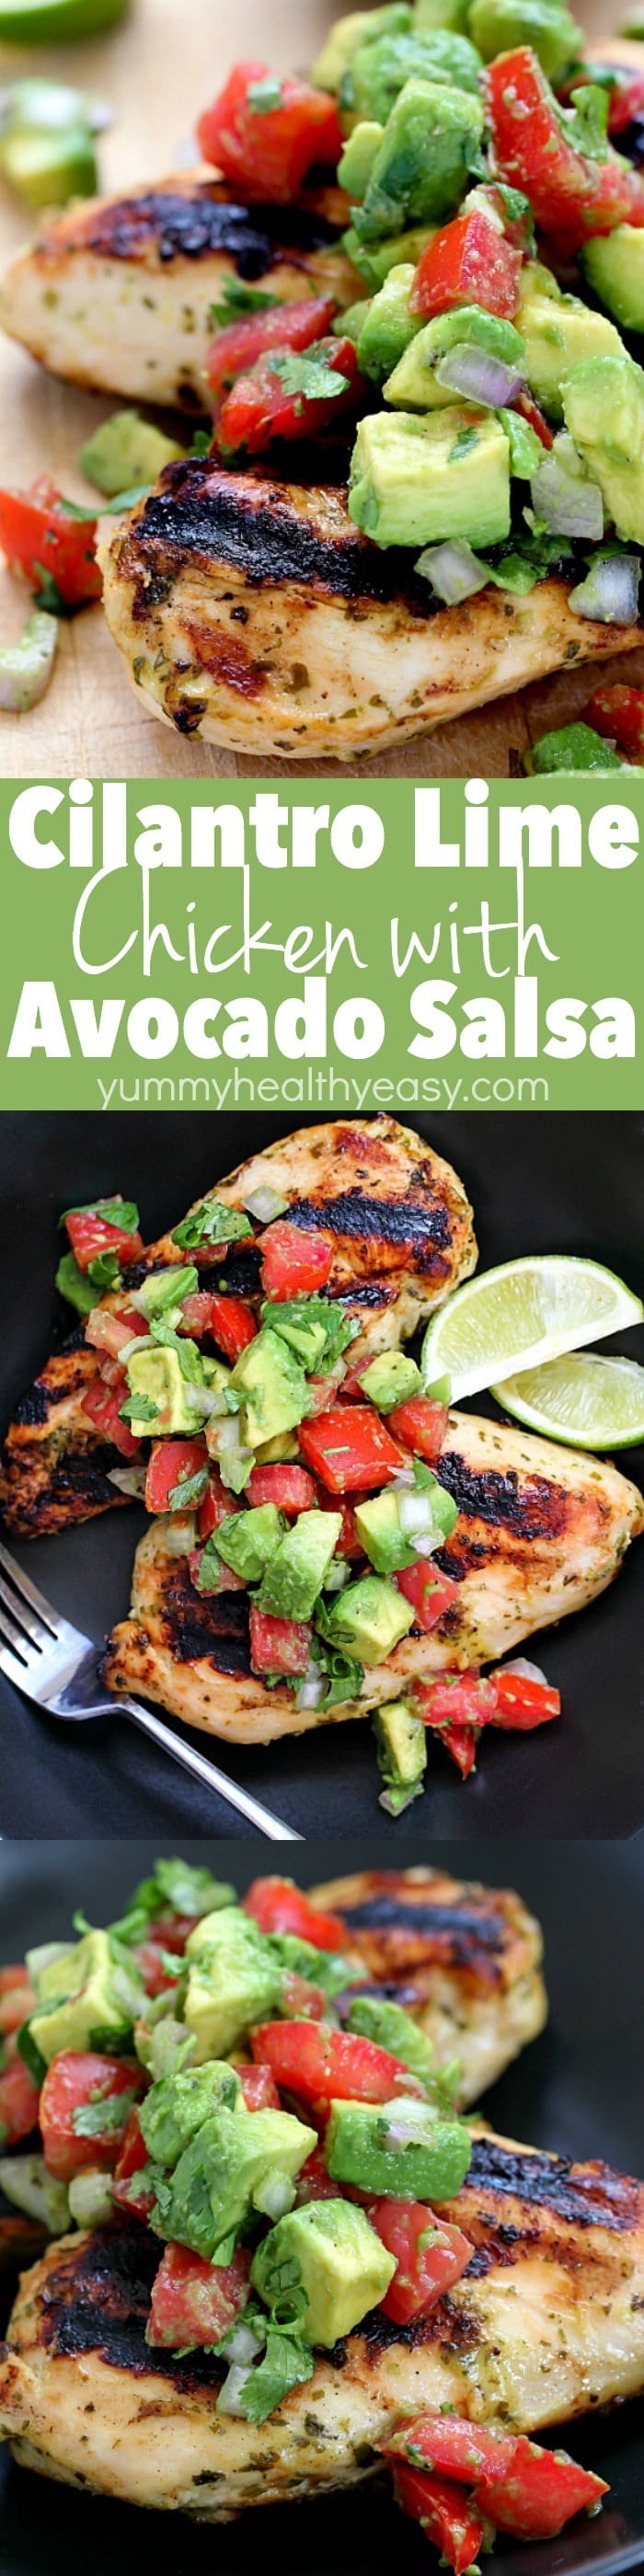 Incredibly tender Cilantro Lime Chicken served with a crazy delicious Avocado Salsa! A healthy dinner recipe that's quick and easy to make but looks fancy! AD via @jennikolaus